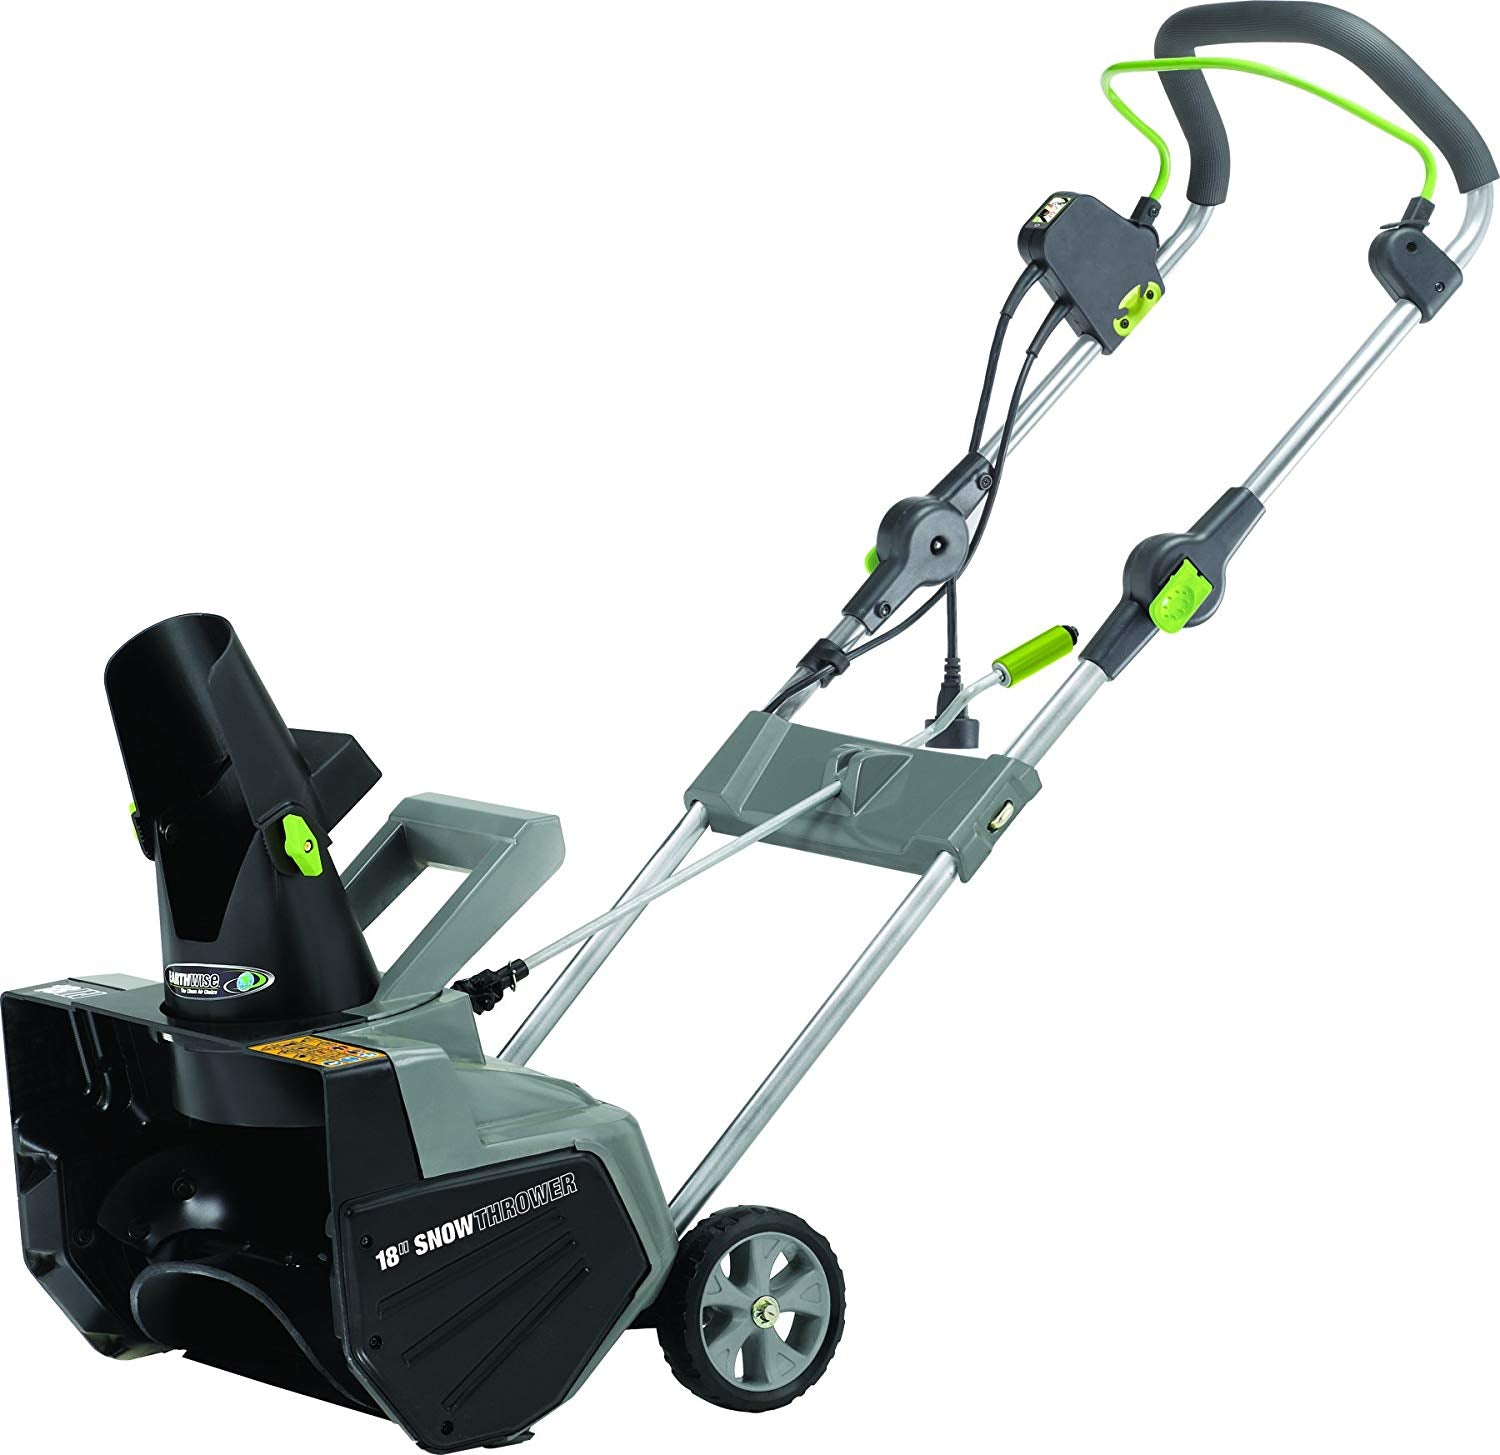 Earthwise Power Tools by ALM 18" 13.5-Amp 120V Corded Snow Thrower